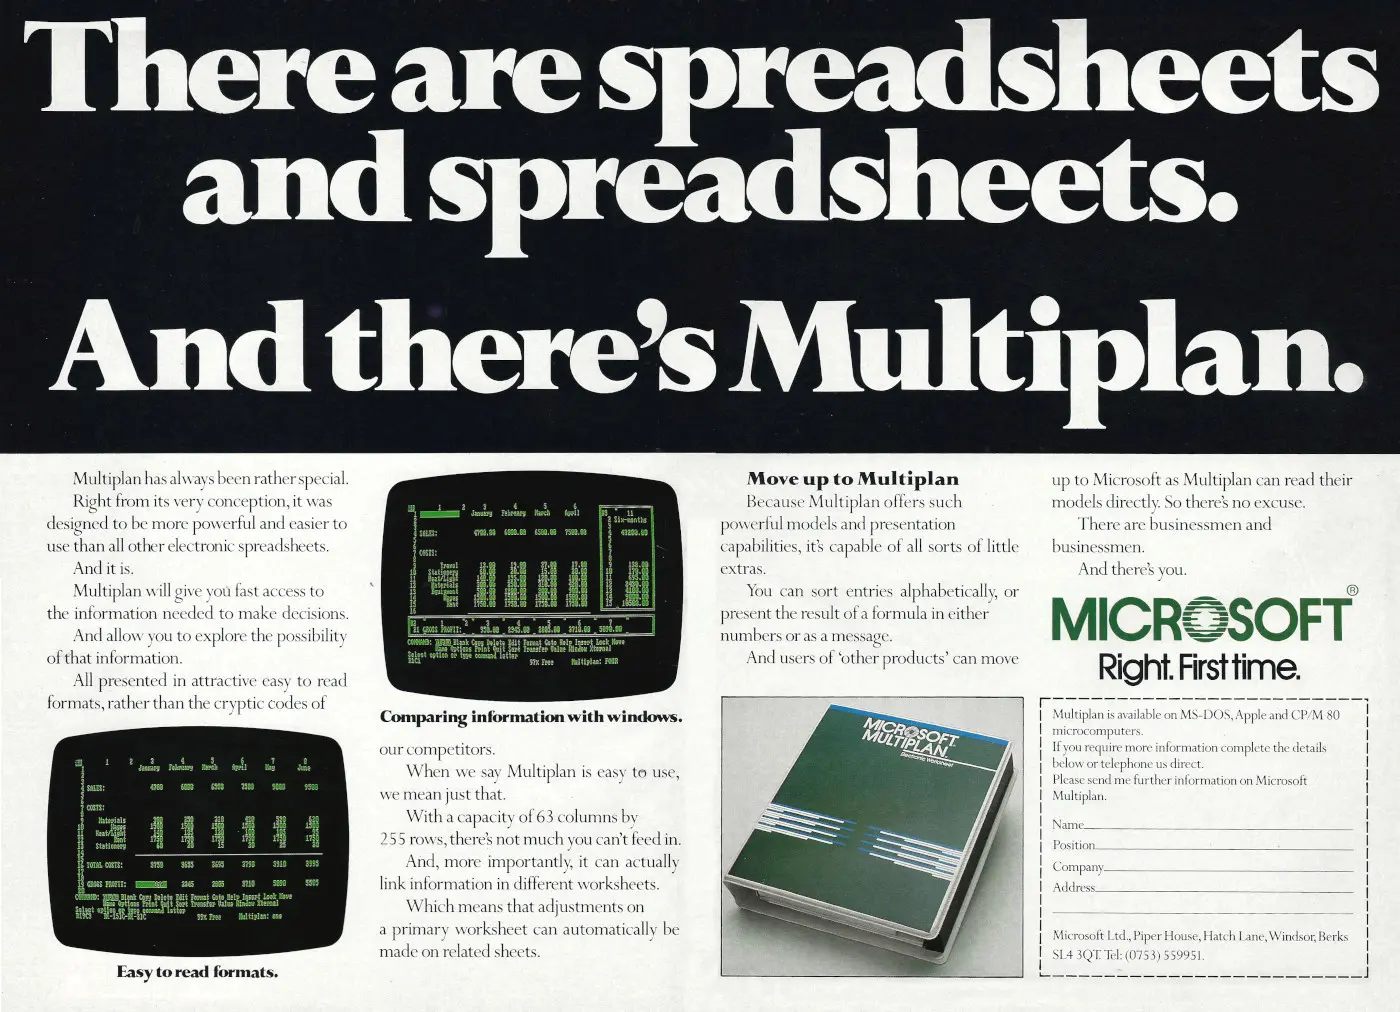 Microsoft Advert: There are spreadsheets and spreadsheets. And there's Multiplan, from Personal Computer World, March 1984